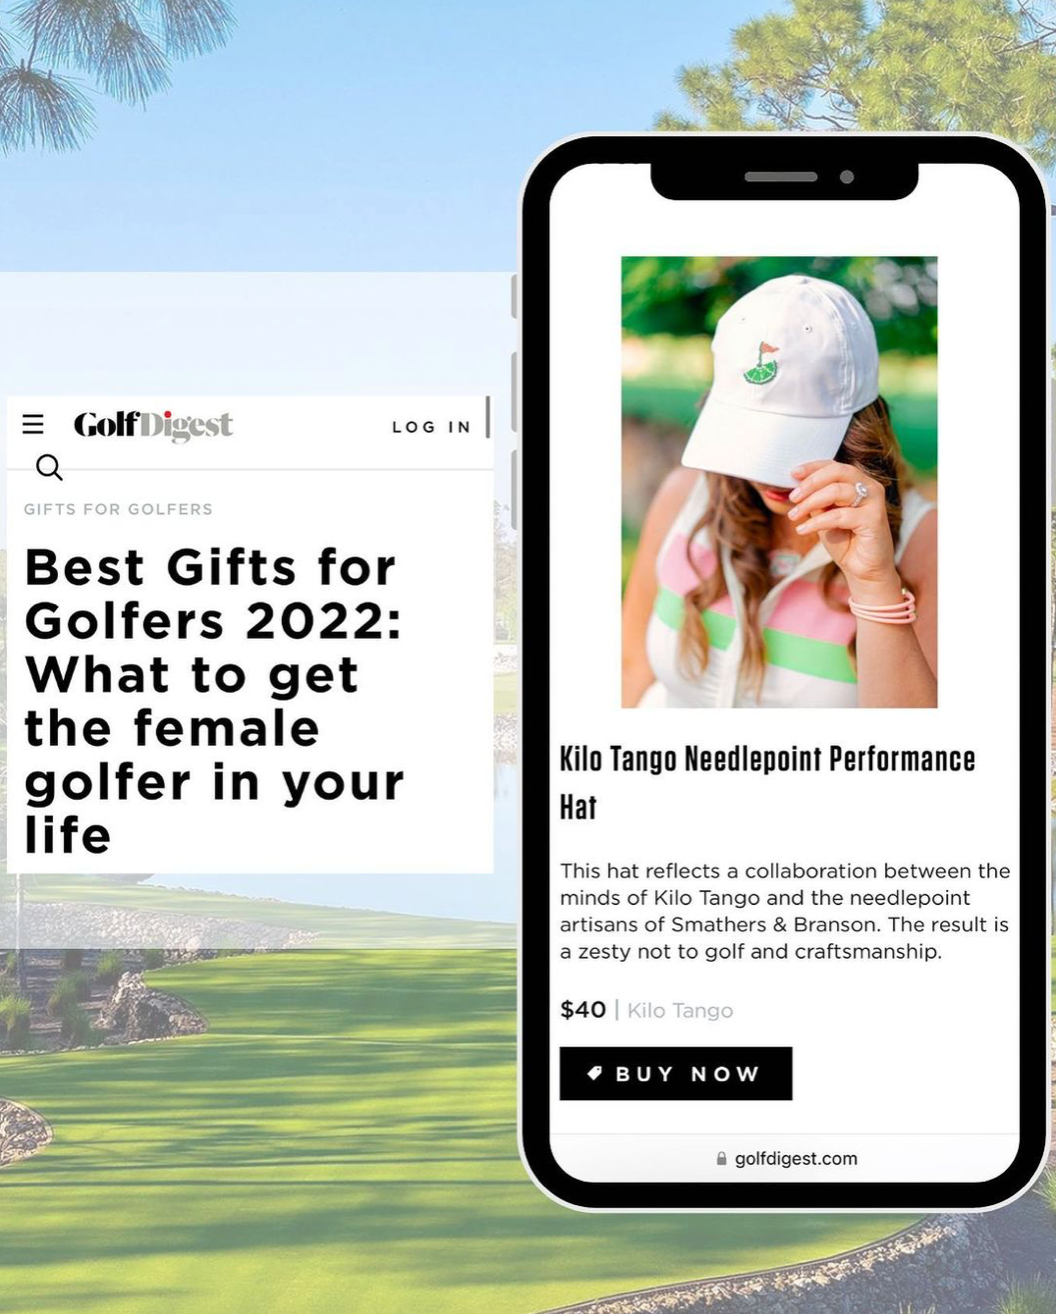 Golf Digest: Best Gifts for Golfers 2022: What to get the female golfer in your life